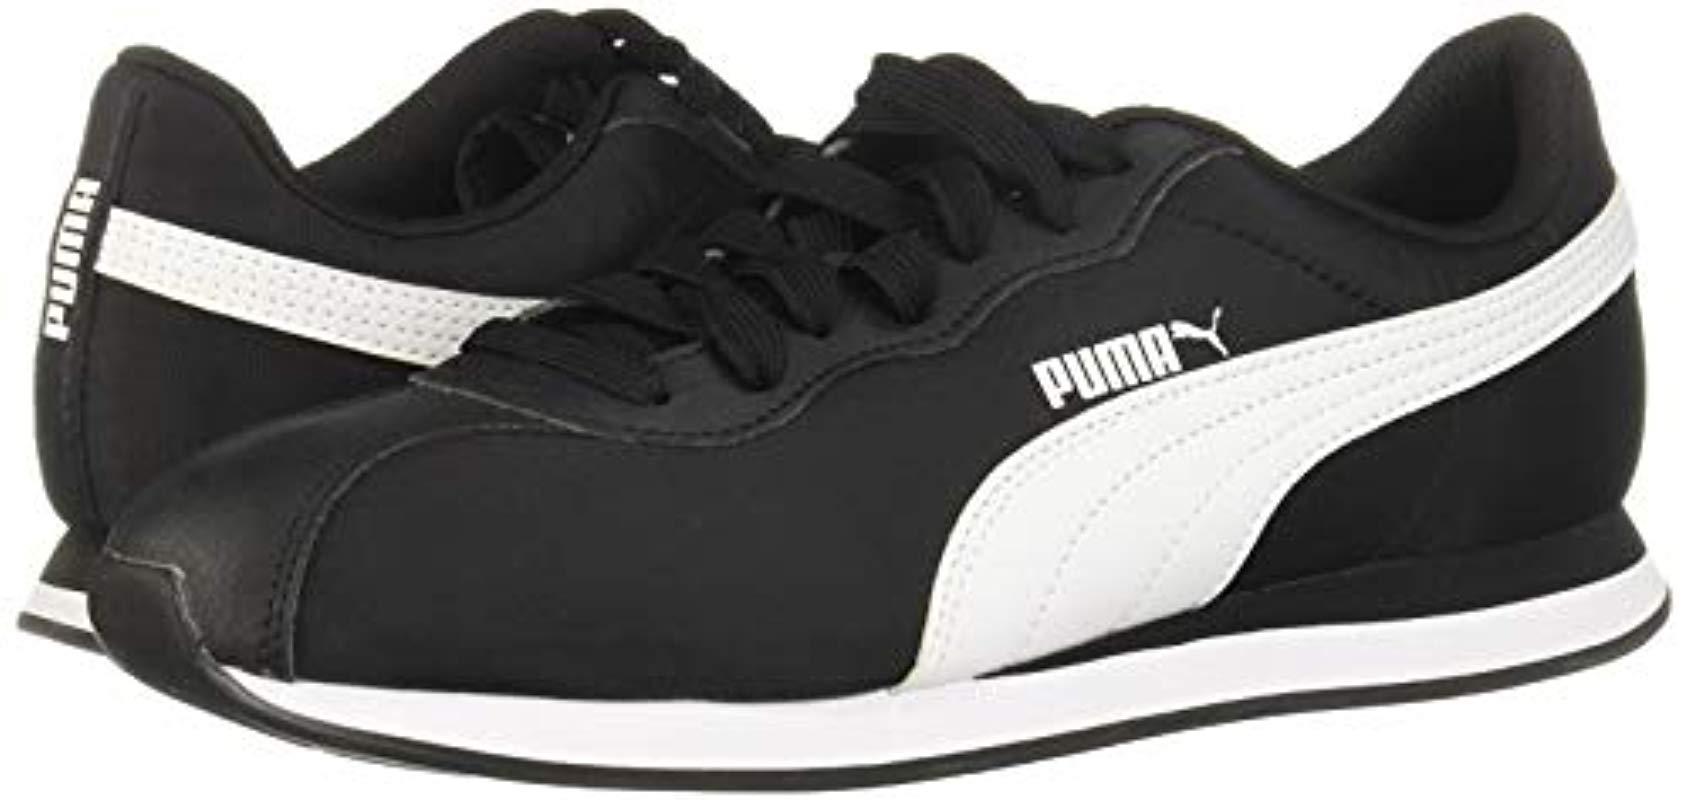 PUMA Synthetic Turin Ii Fitness Shoes in Black-White (Black) for Men - Save  58% | Lyst